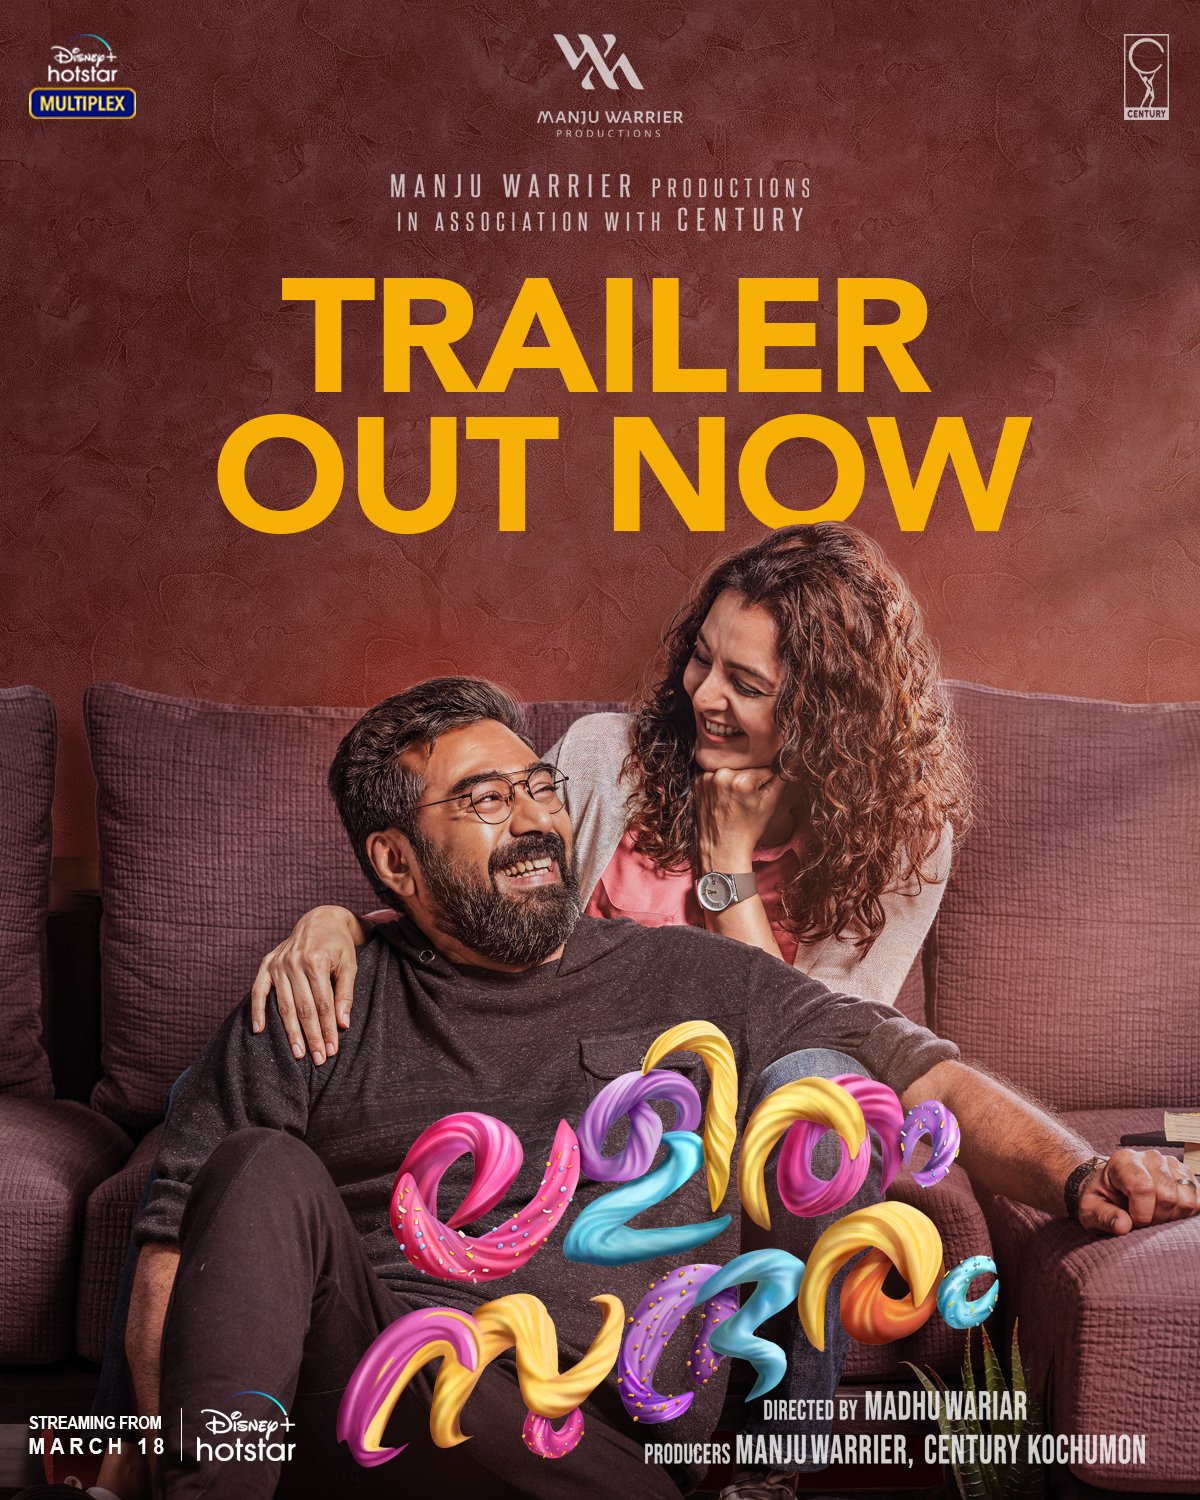 Manju Warrier on X: Trailer out now! ❤️ Lalitham Sundaram coming to your  home screens through #DisneyPlusHotstar on 18 March 2022 !!!  t.co7BnaEln0pQ t.coF7blhU0Uey  X